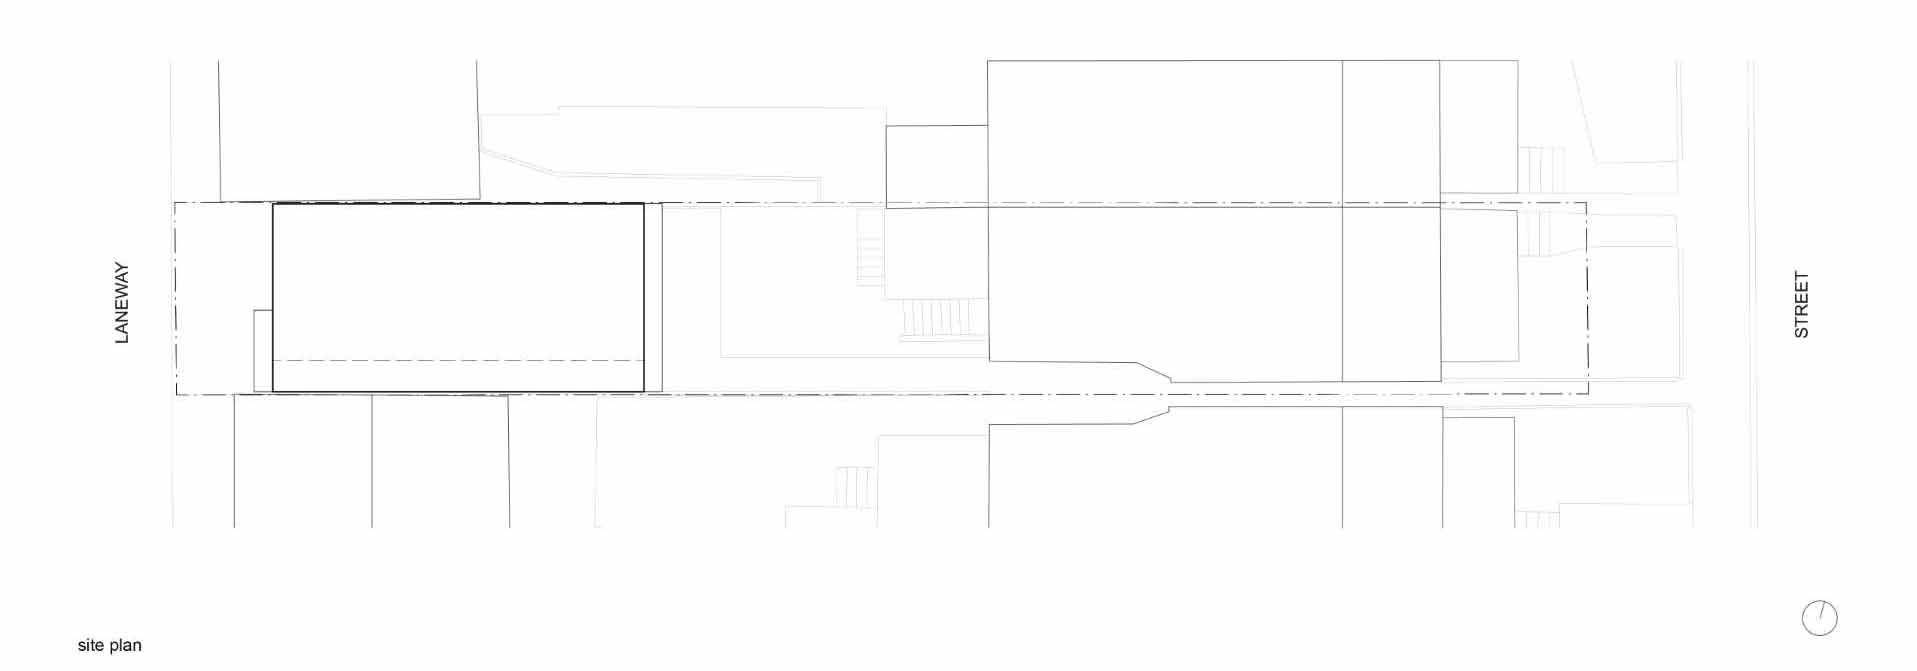 Architectural drawings for a laneway house.